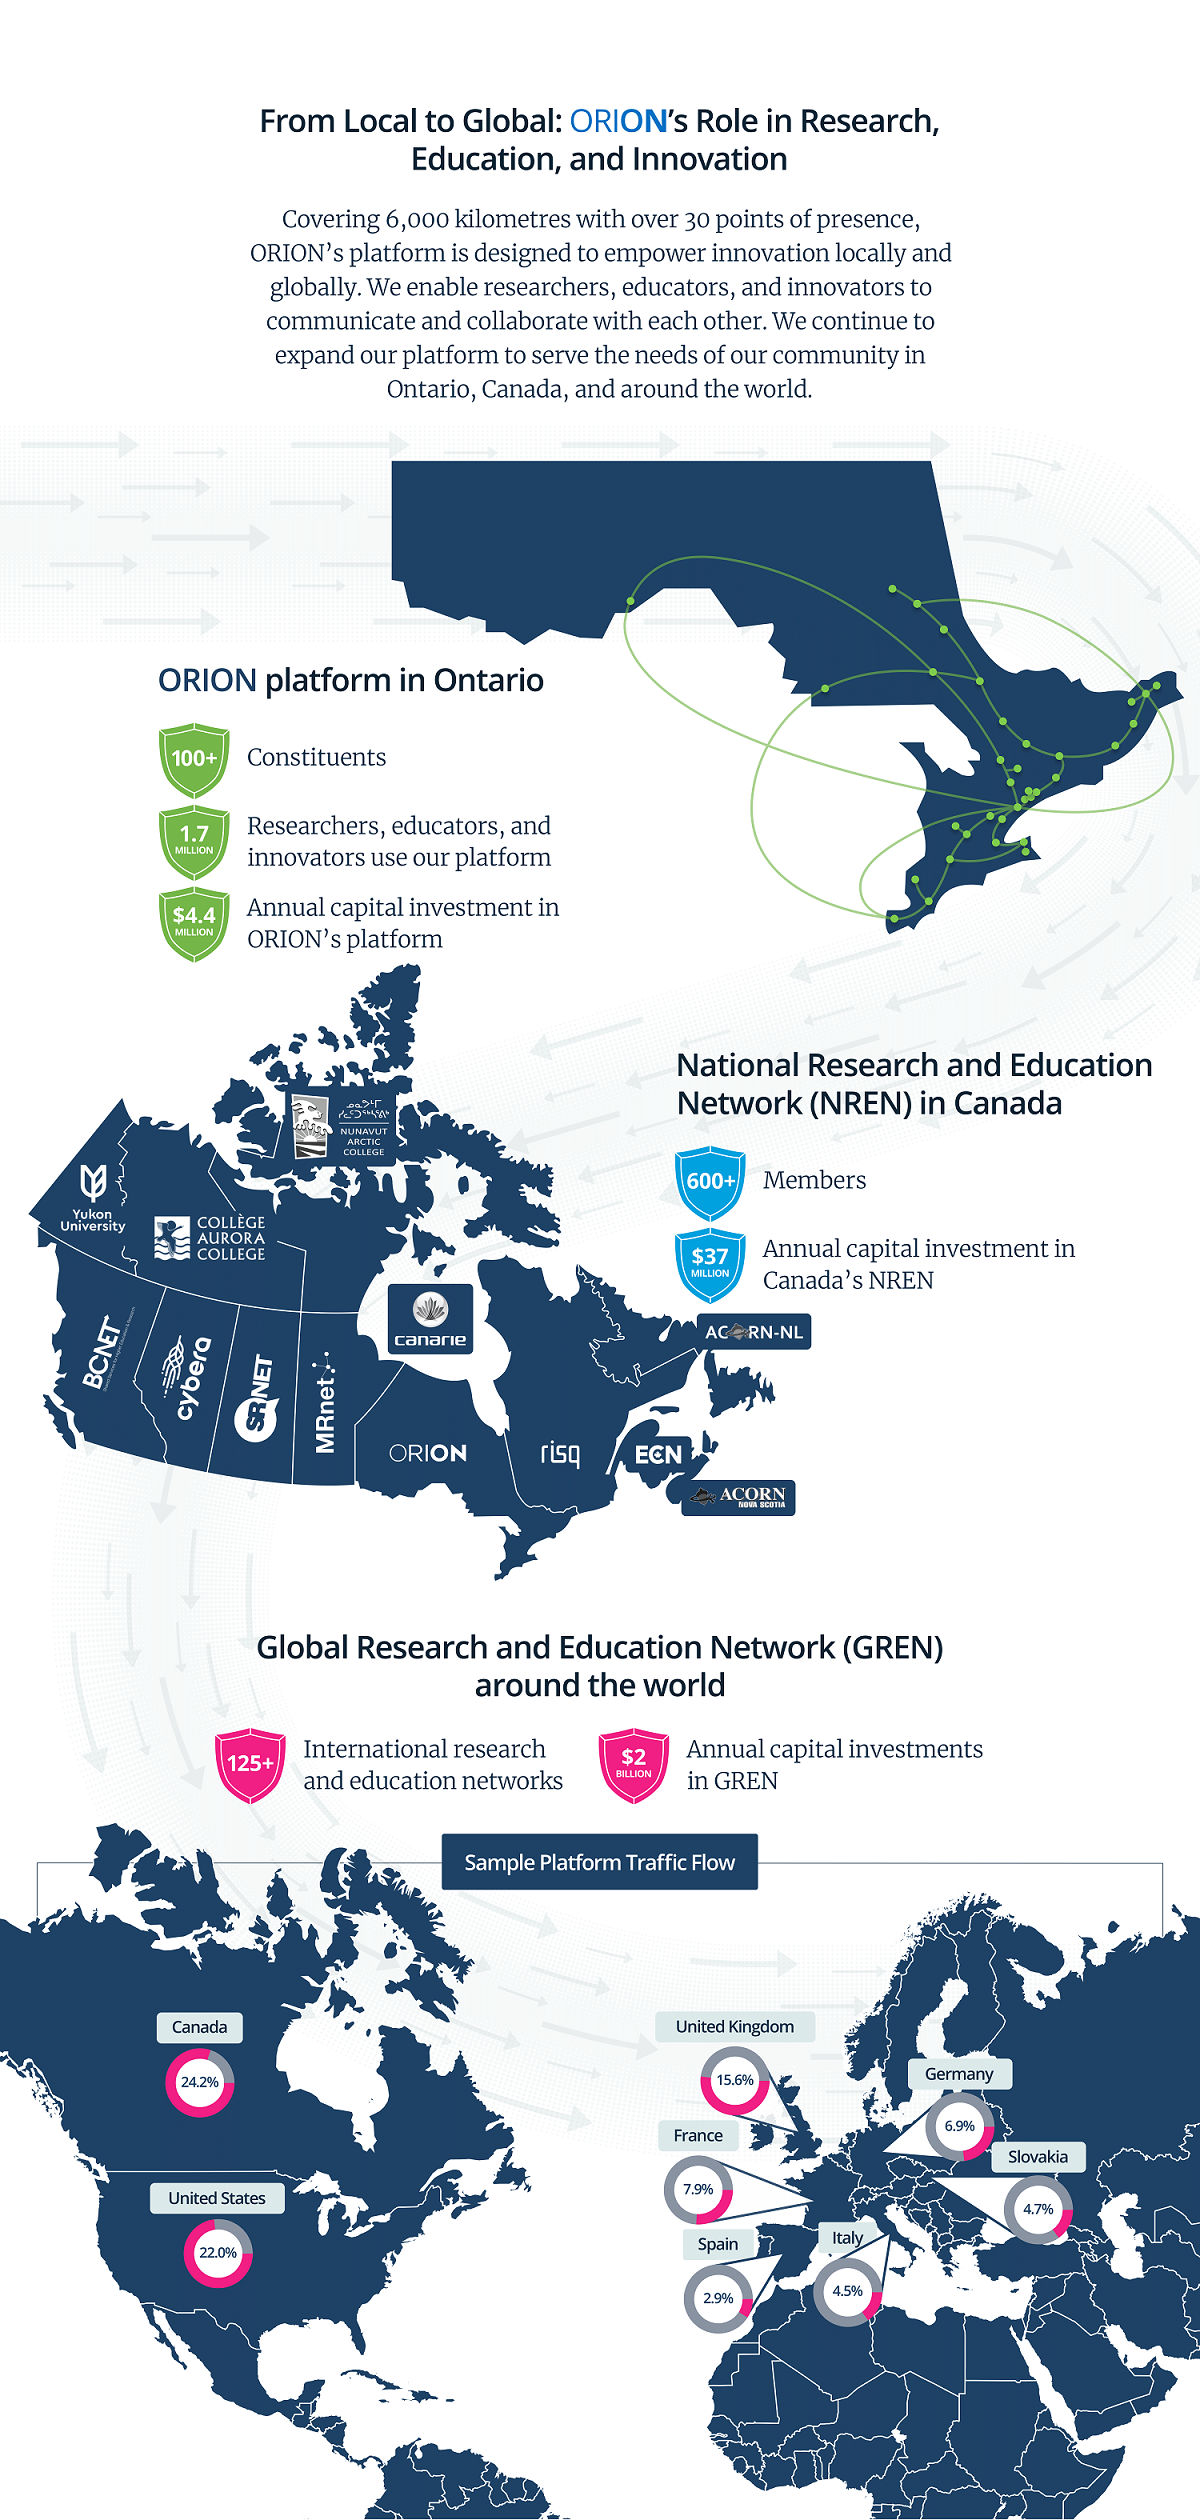 From Local to Global - ORION's Role in Research, Education, and Innovation